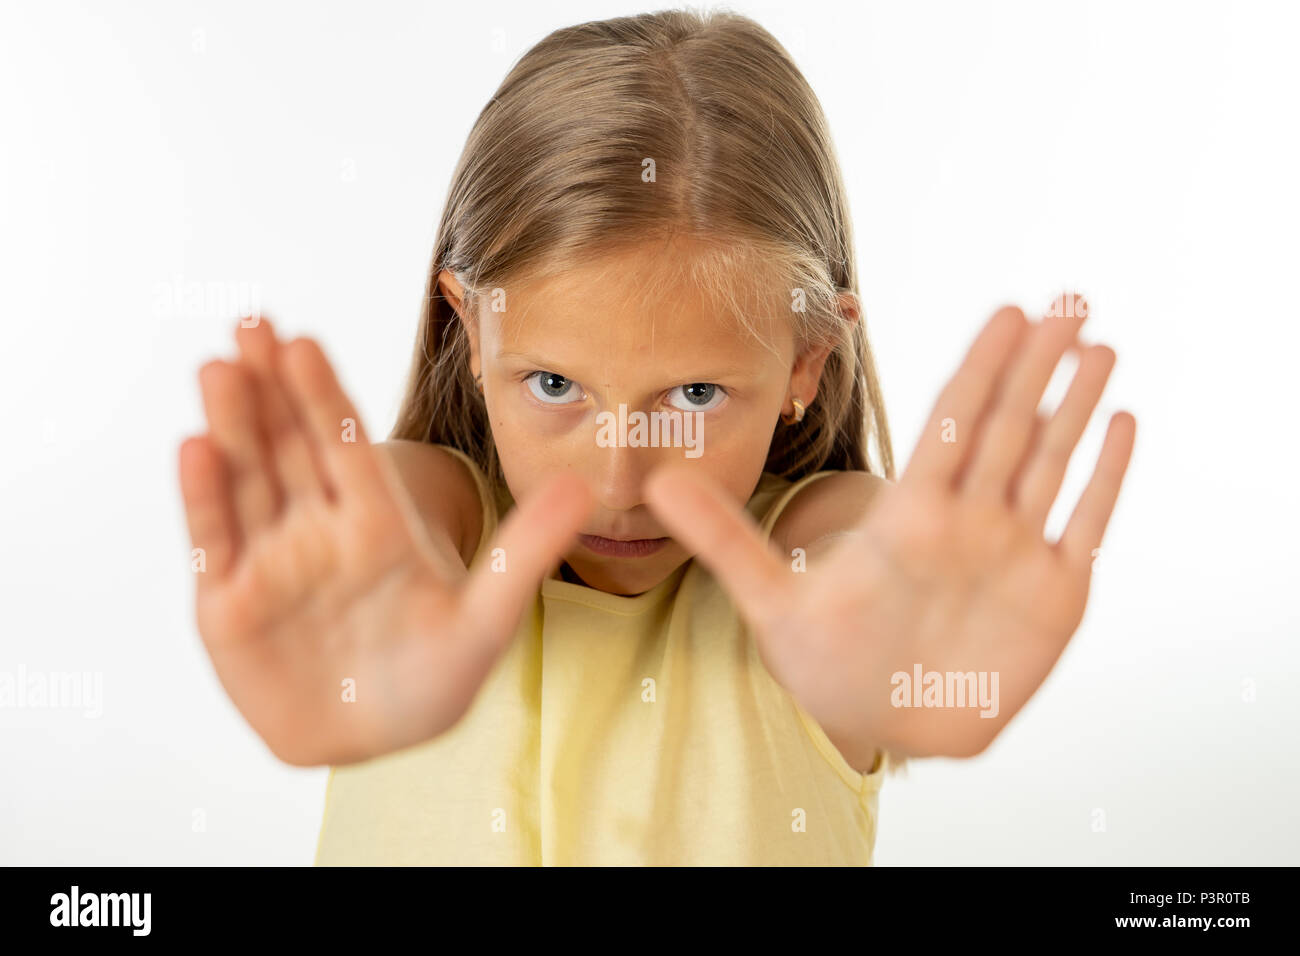 young cute schoolgirl scared, stressed and bulled looking desperate asking for help in victim children bullied abuse concept Stock Photo